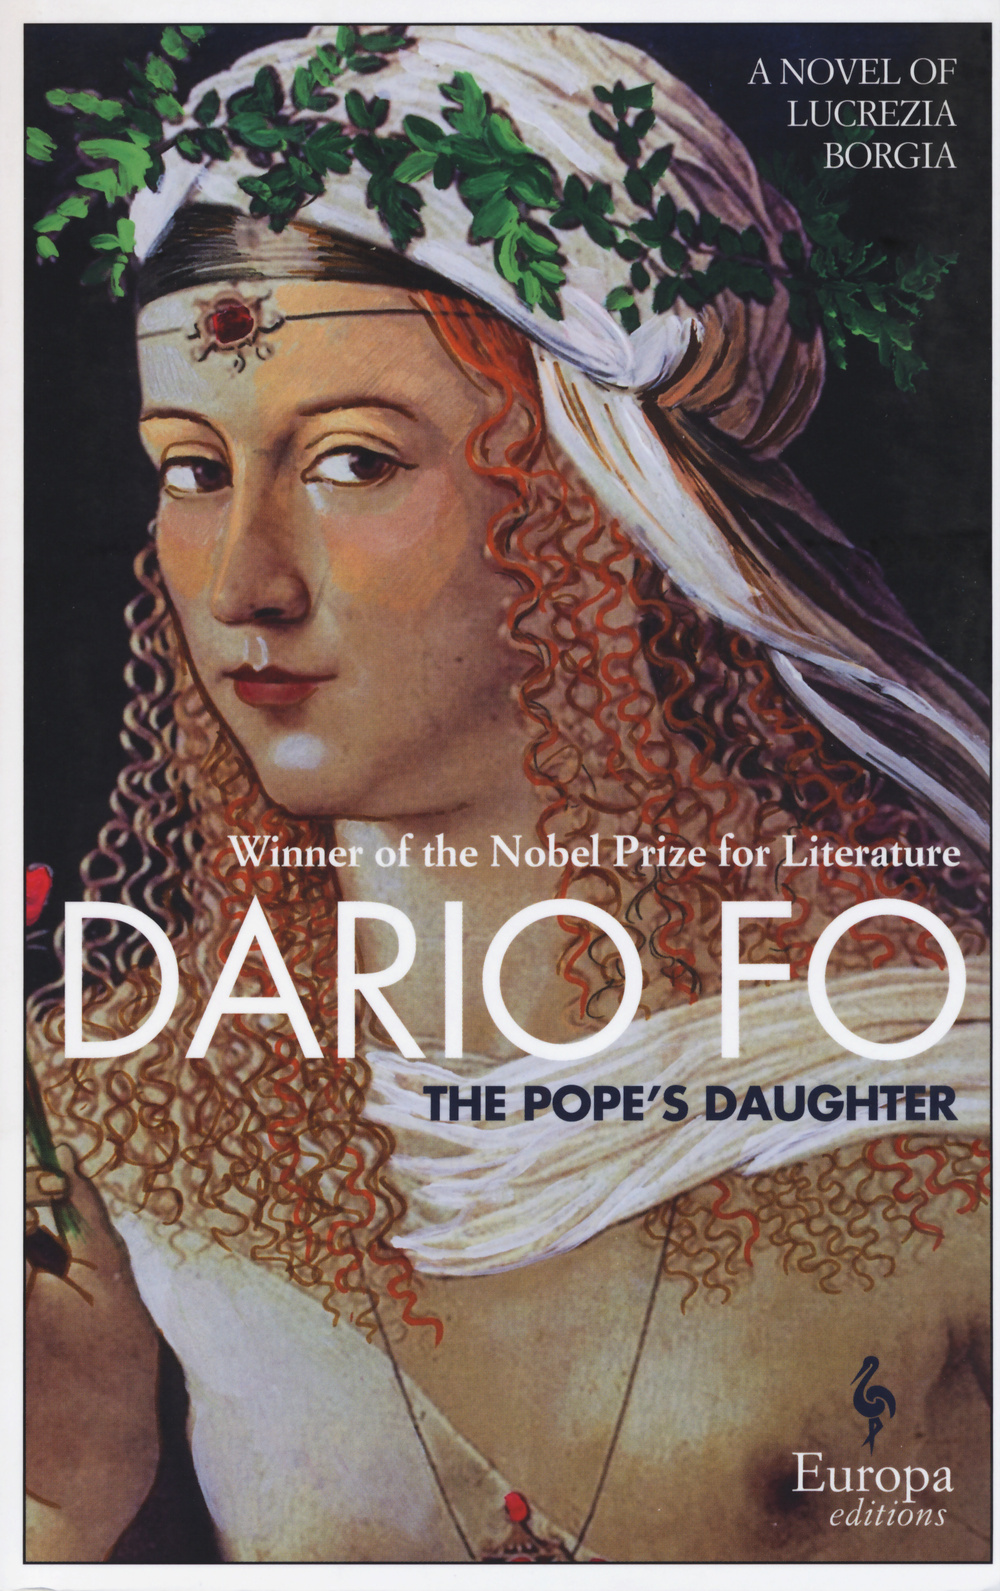 The pope's daughter